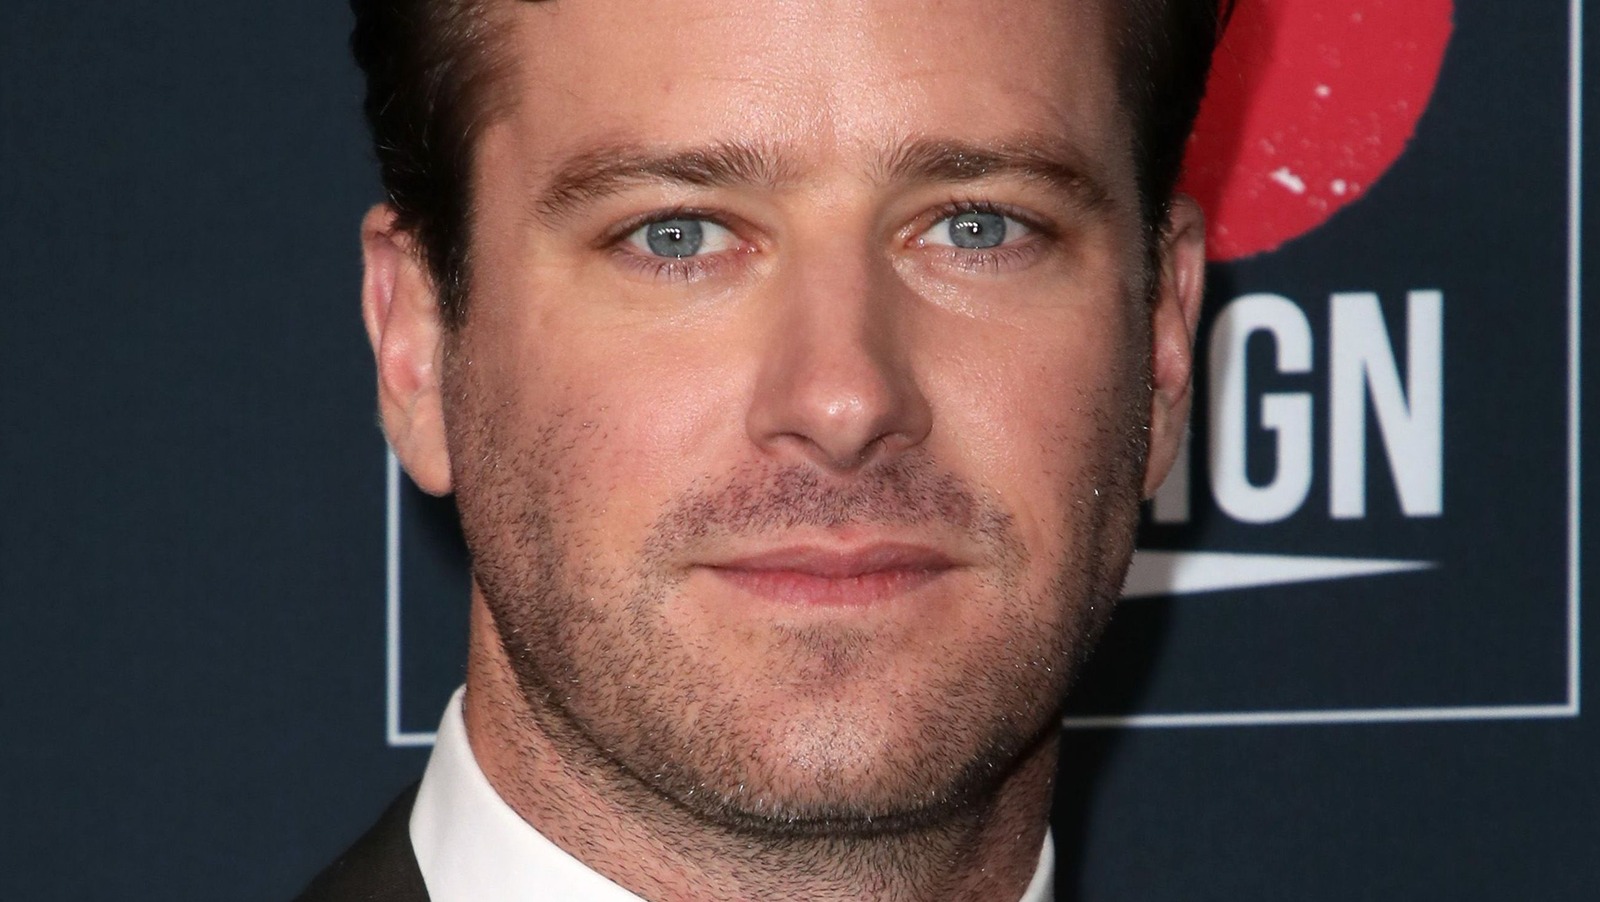 What Armie Hammer Is Reportedly Focusing On Amid Documentary Controversy